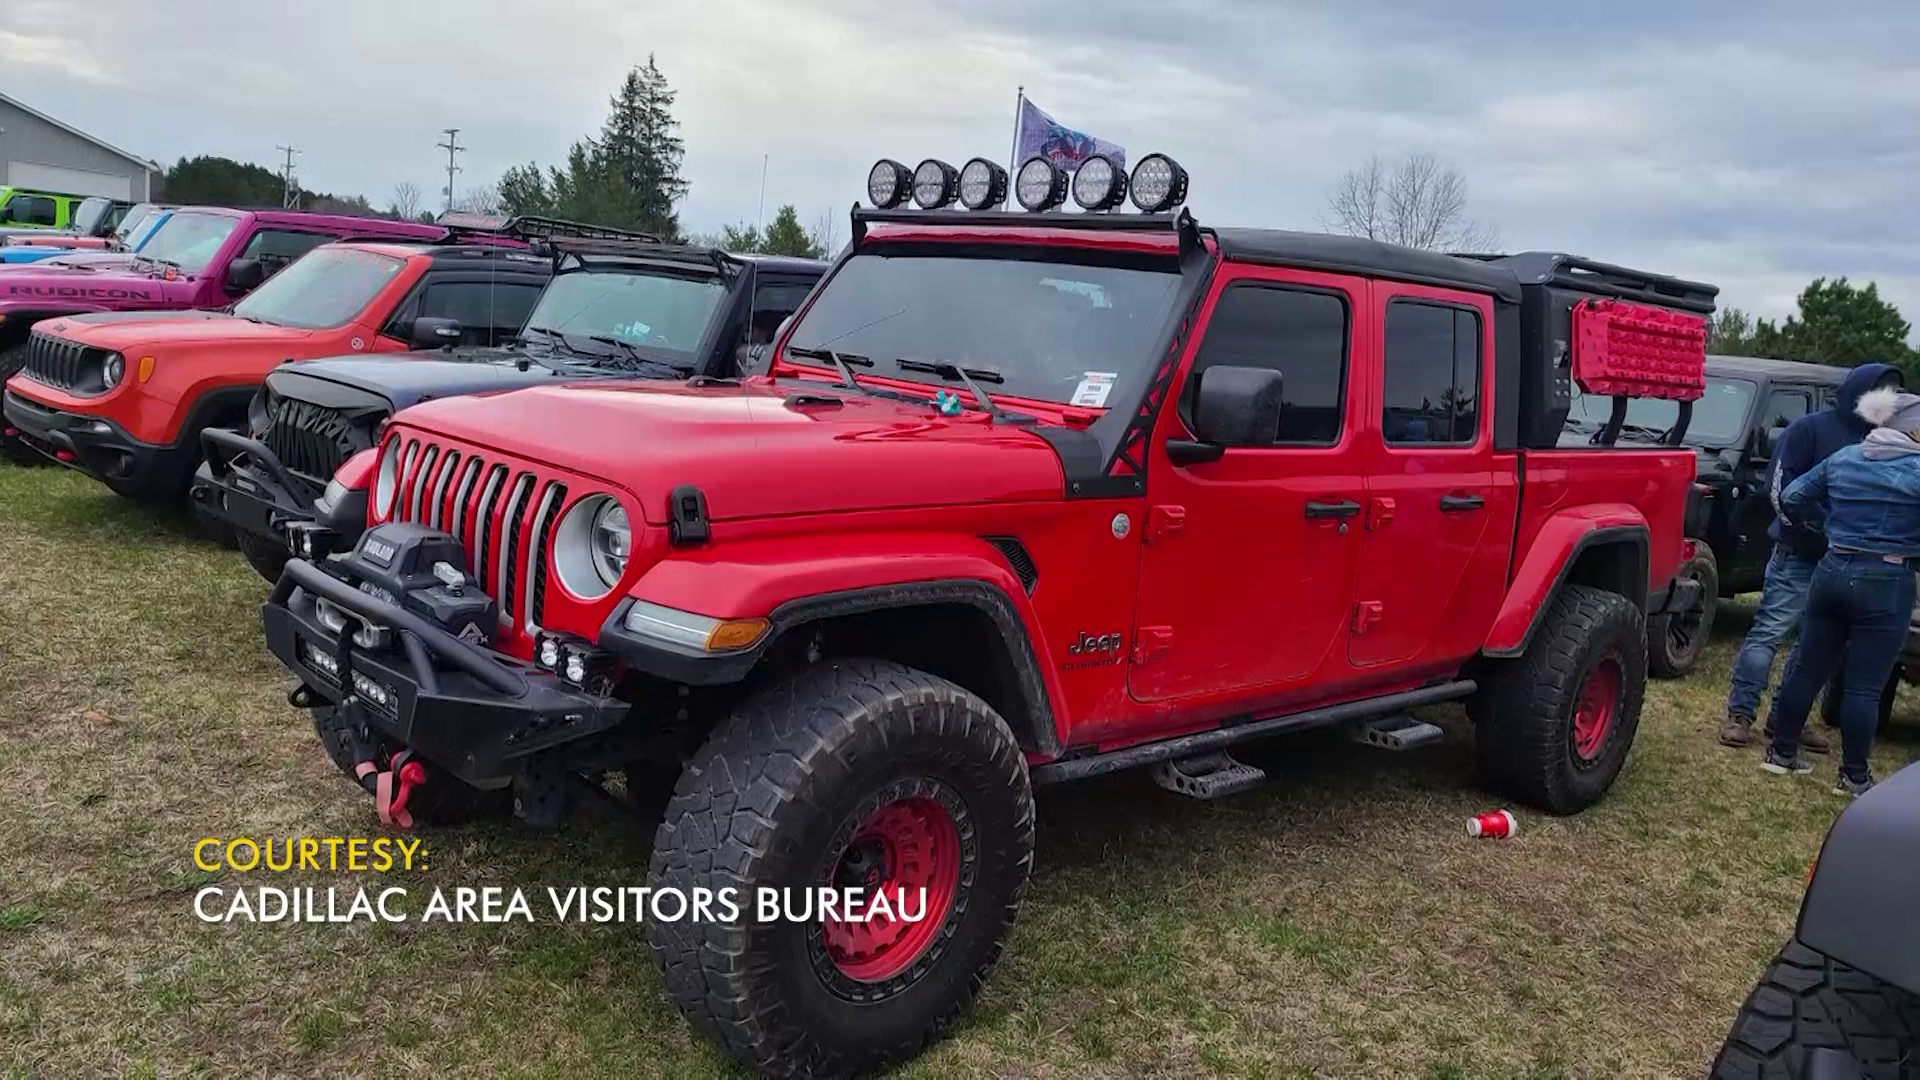 Organizations come together for the 23rd Annual Blessing of the Jeeps